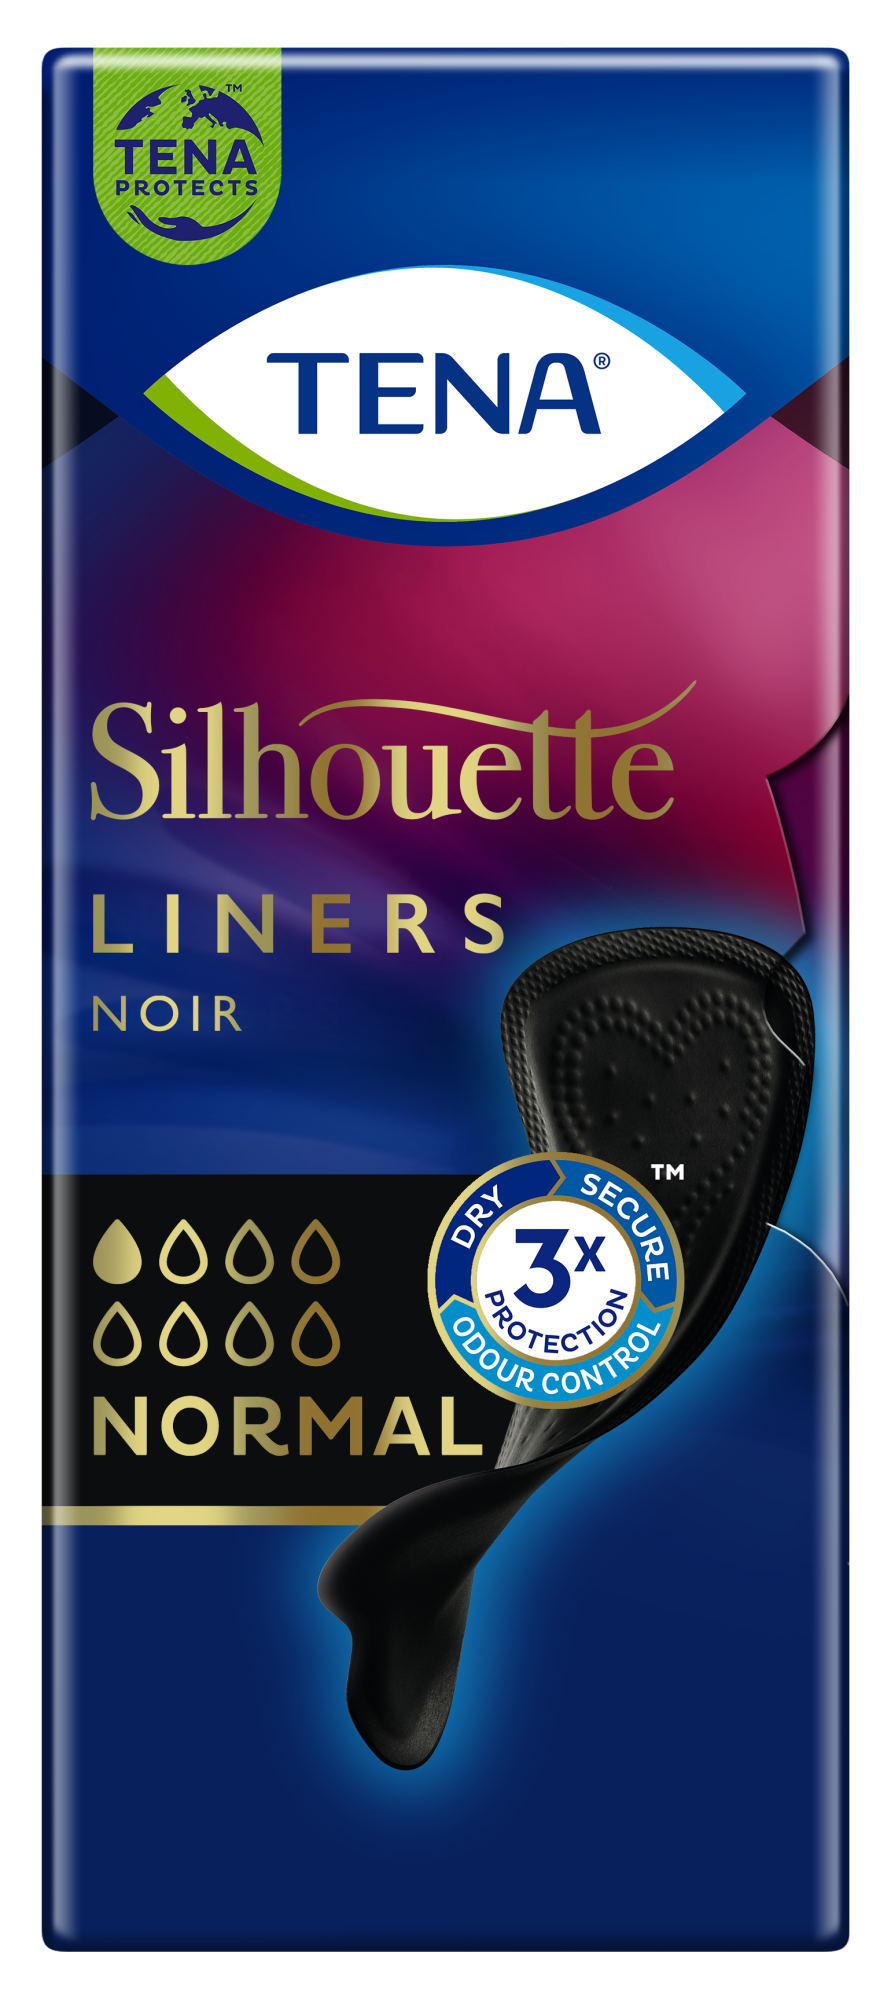 TENA Silhouette Noir Normal Liners | Black incontinence liners 